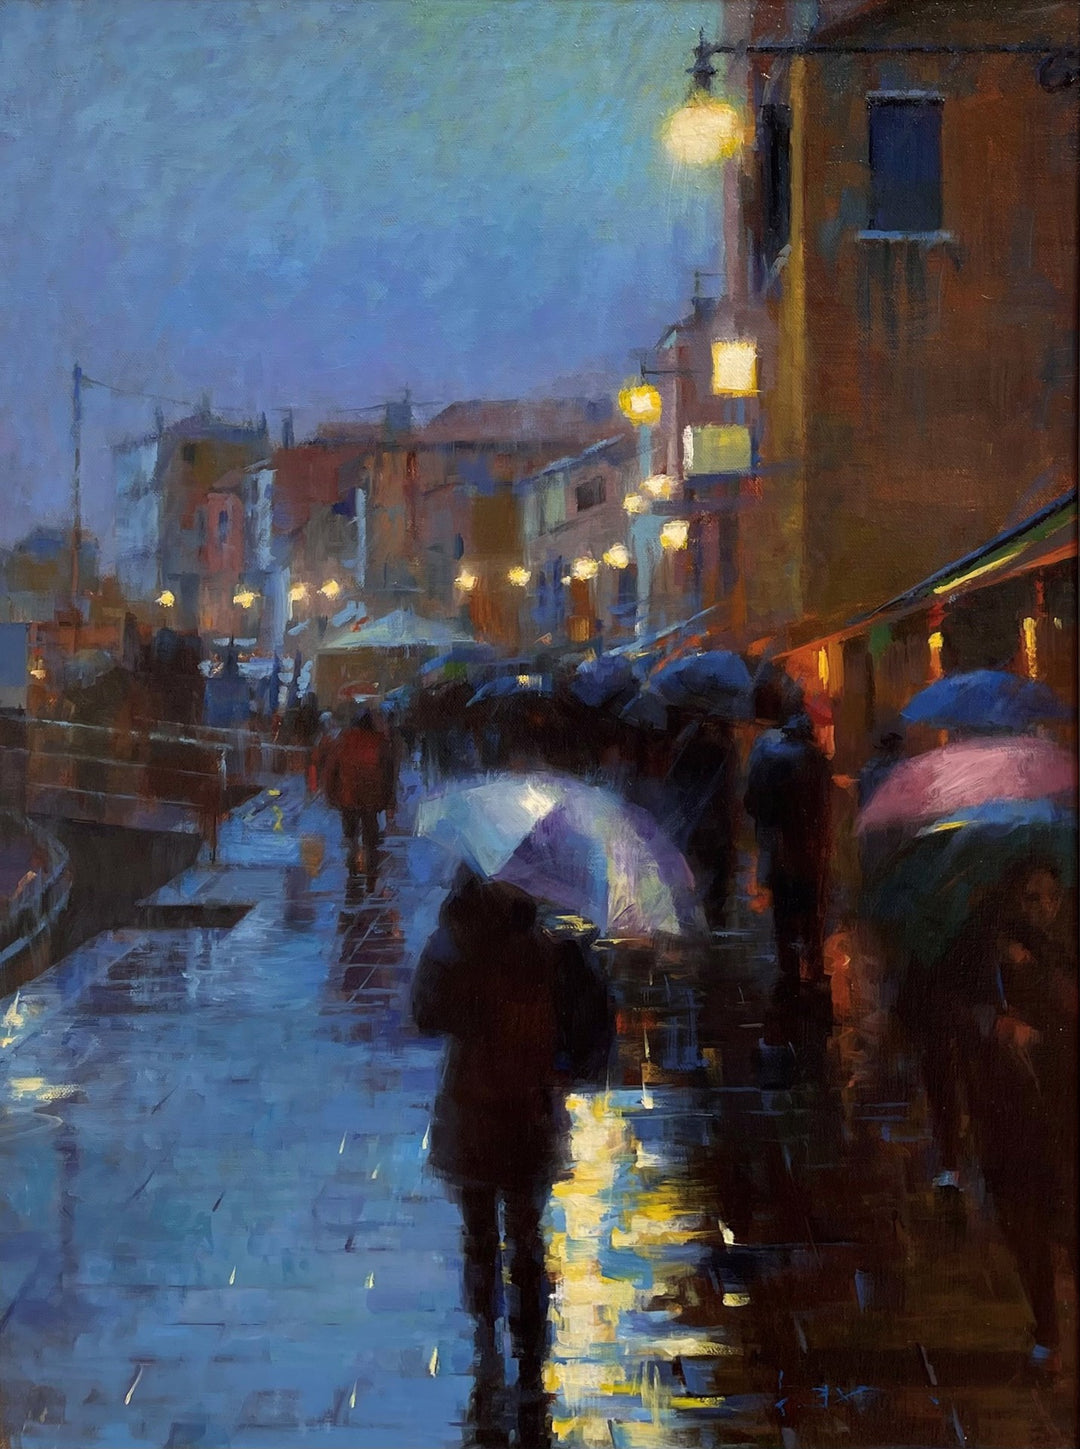 A painting titled "Tae Park - Winter Rain in Venice 2" depicts people walking down a street with umbrellas. The artwork, created by Tae Park using oil paint, captures the serene atmosphere of rainy winter.